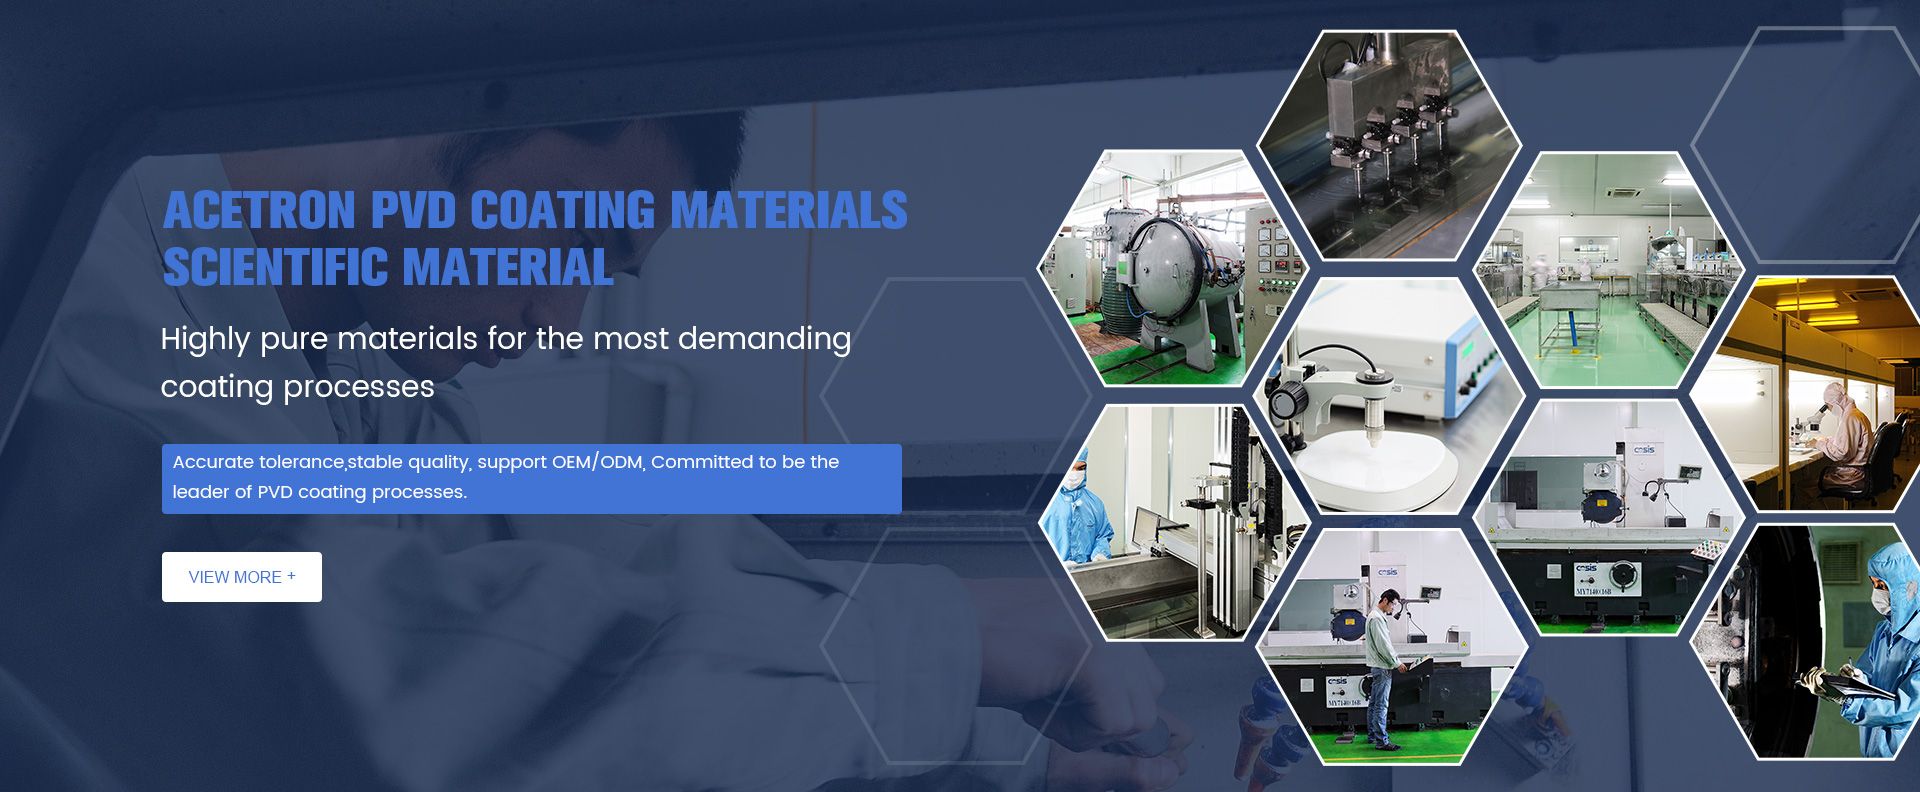 Acetron PVD coating materials scientific material